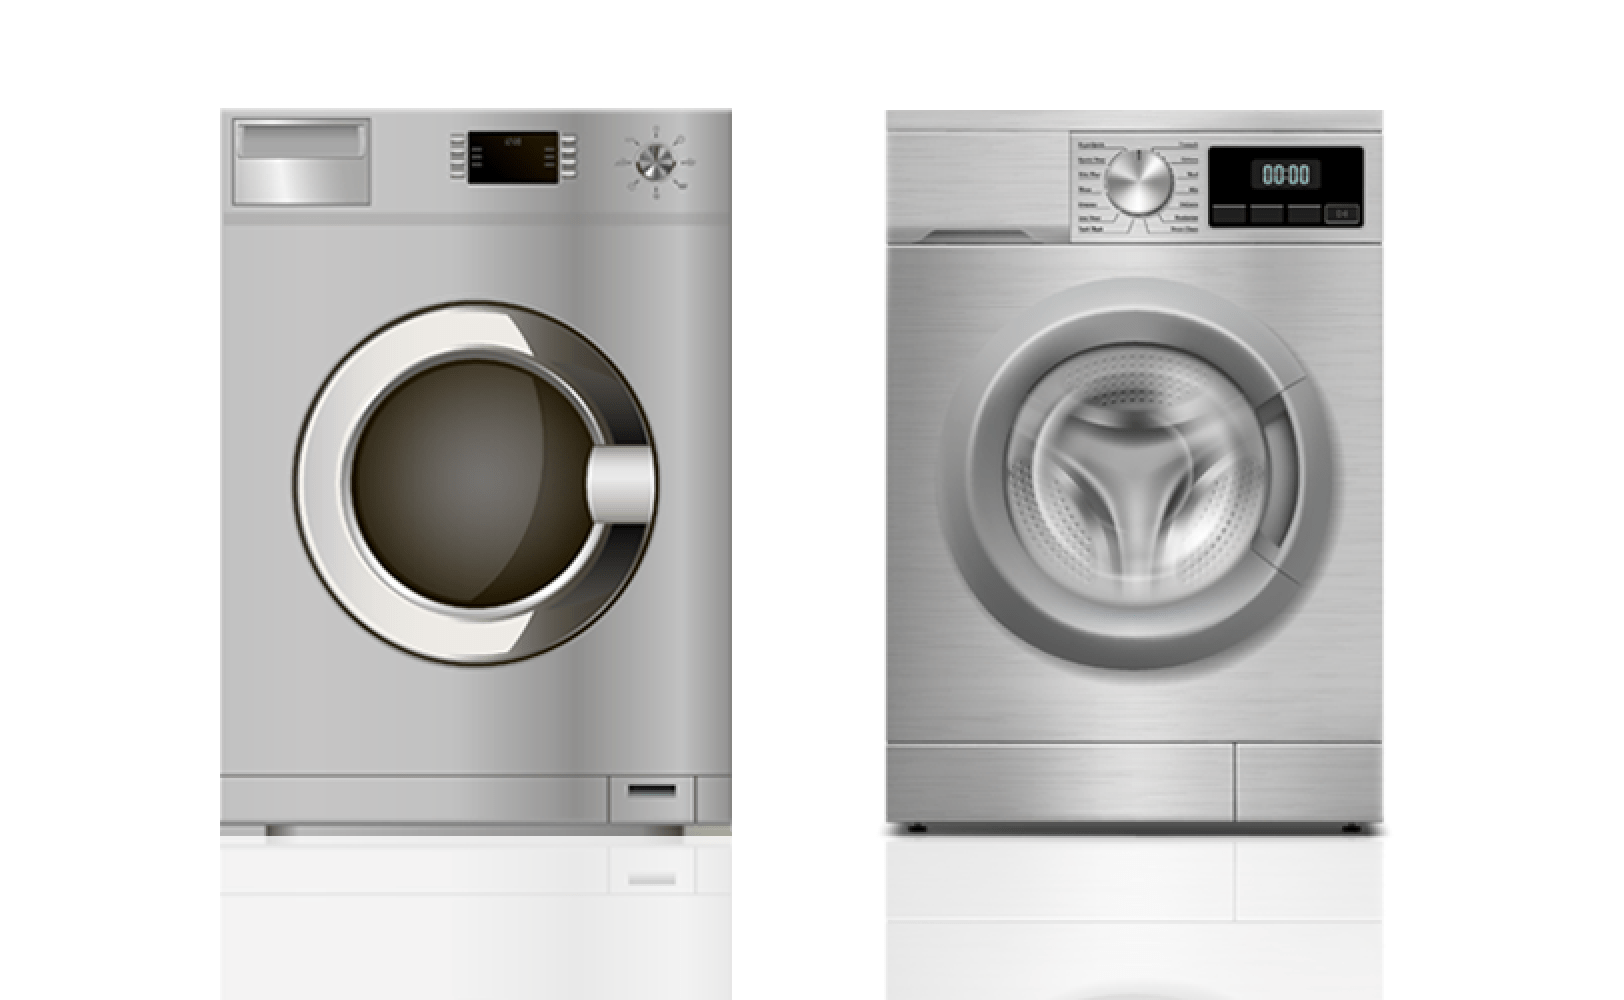 Washer Repair Service in Telford